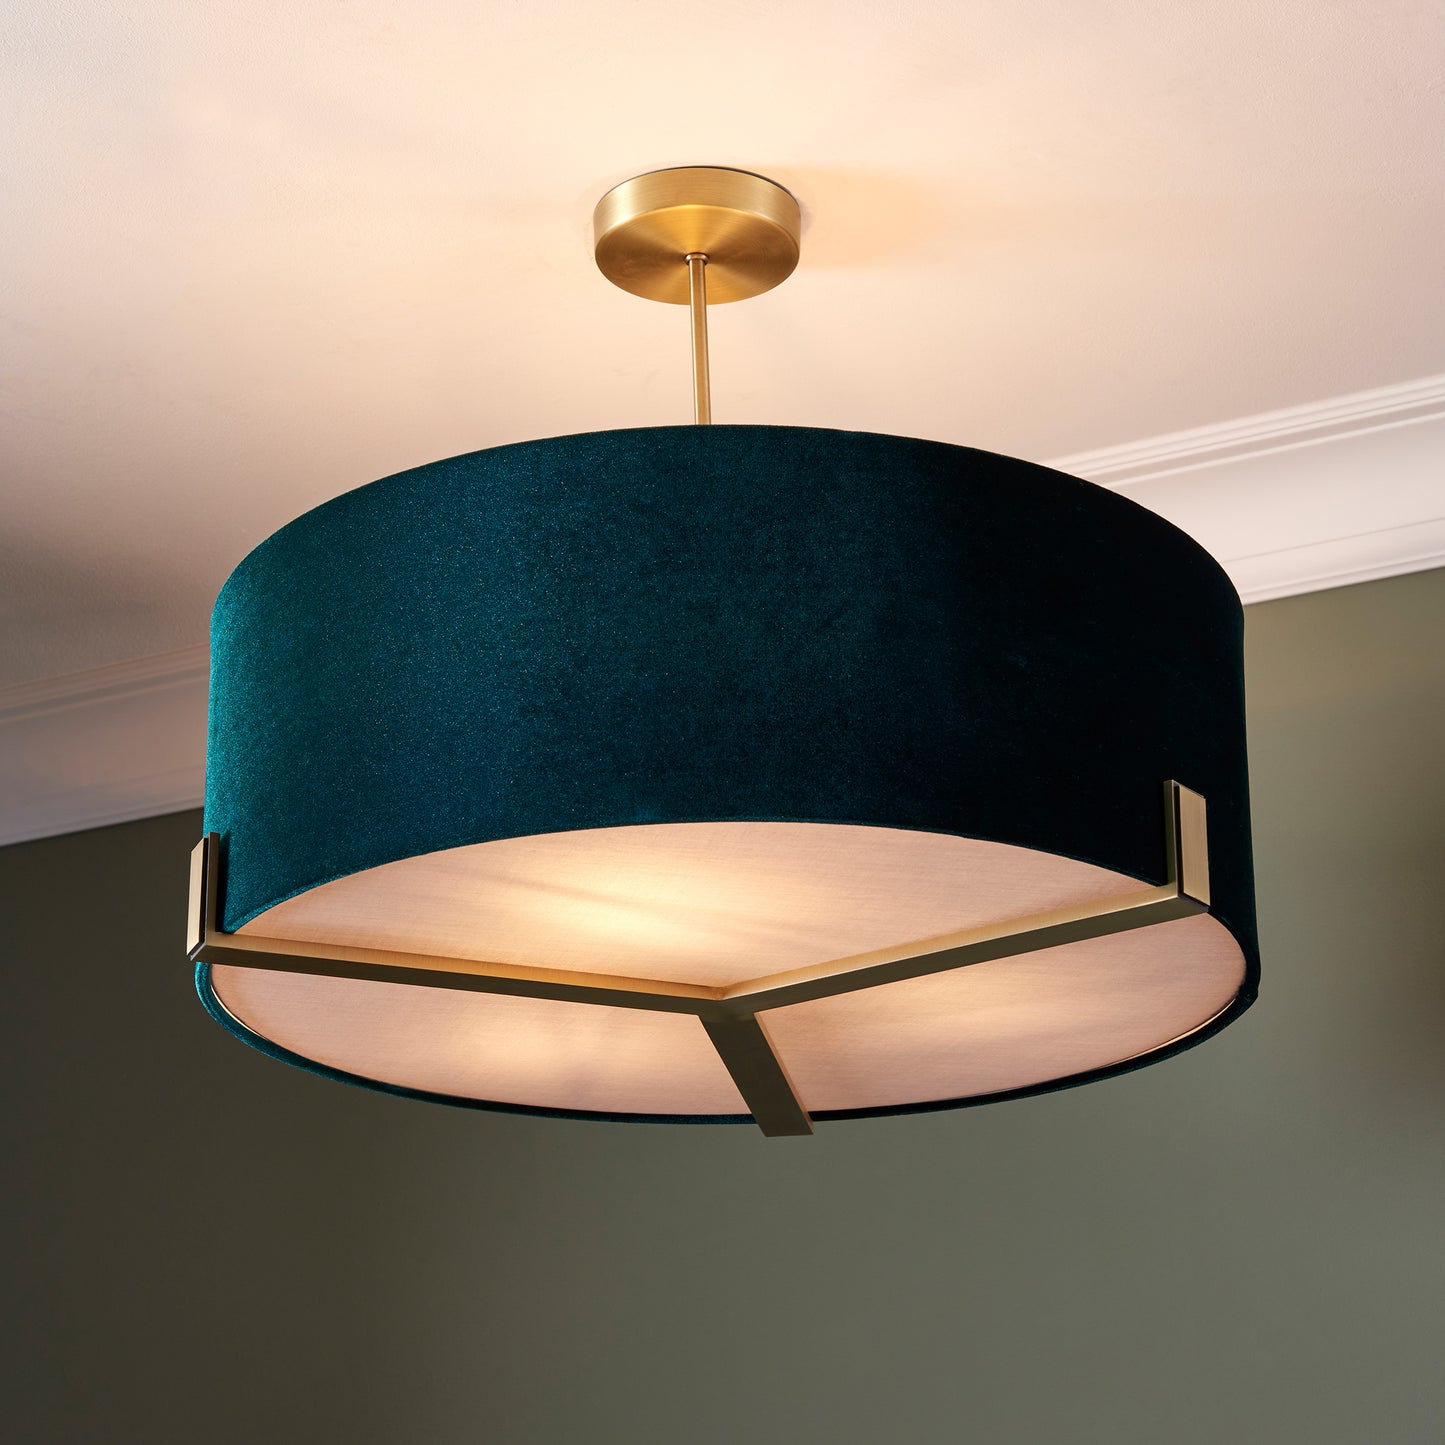 A Hayfield Pendant Light with a green velvet shade, perfect for home decor.